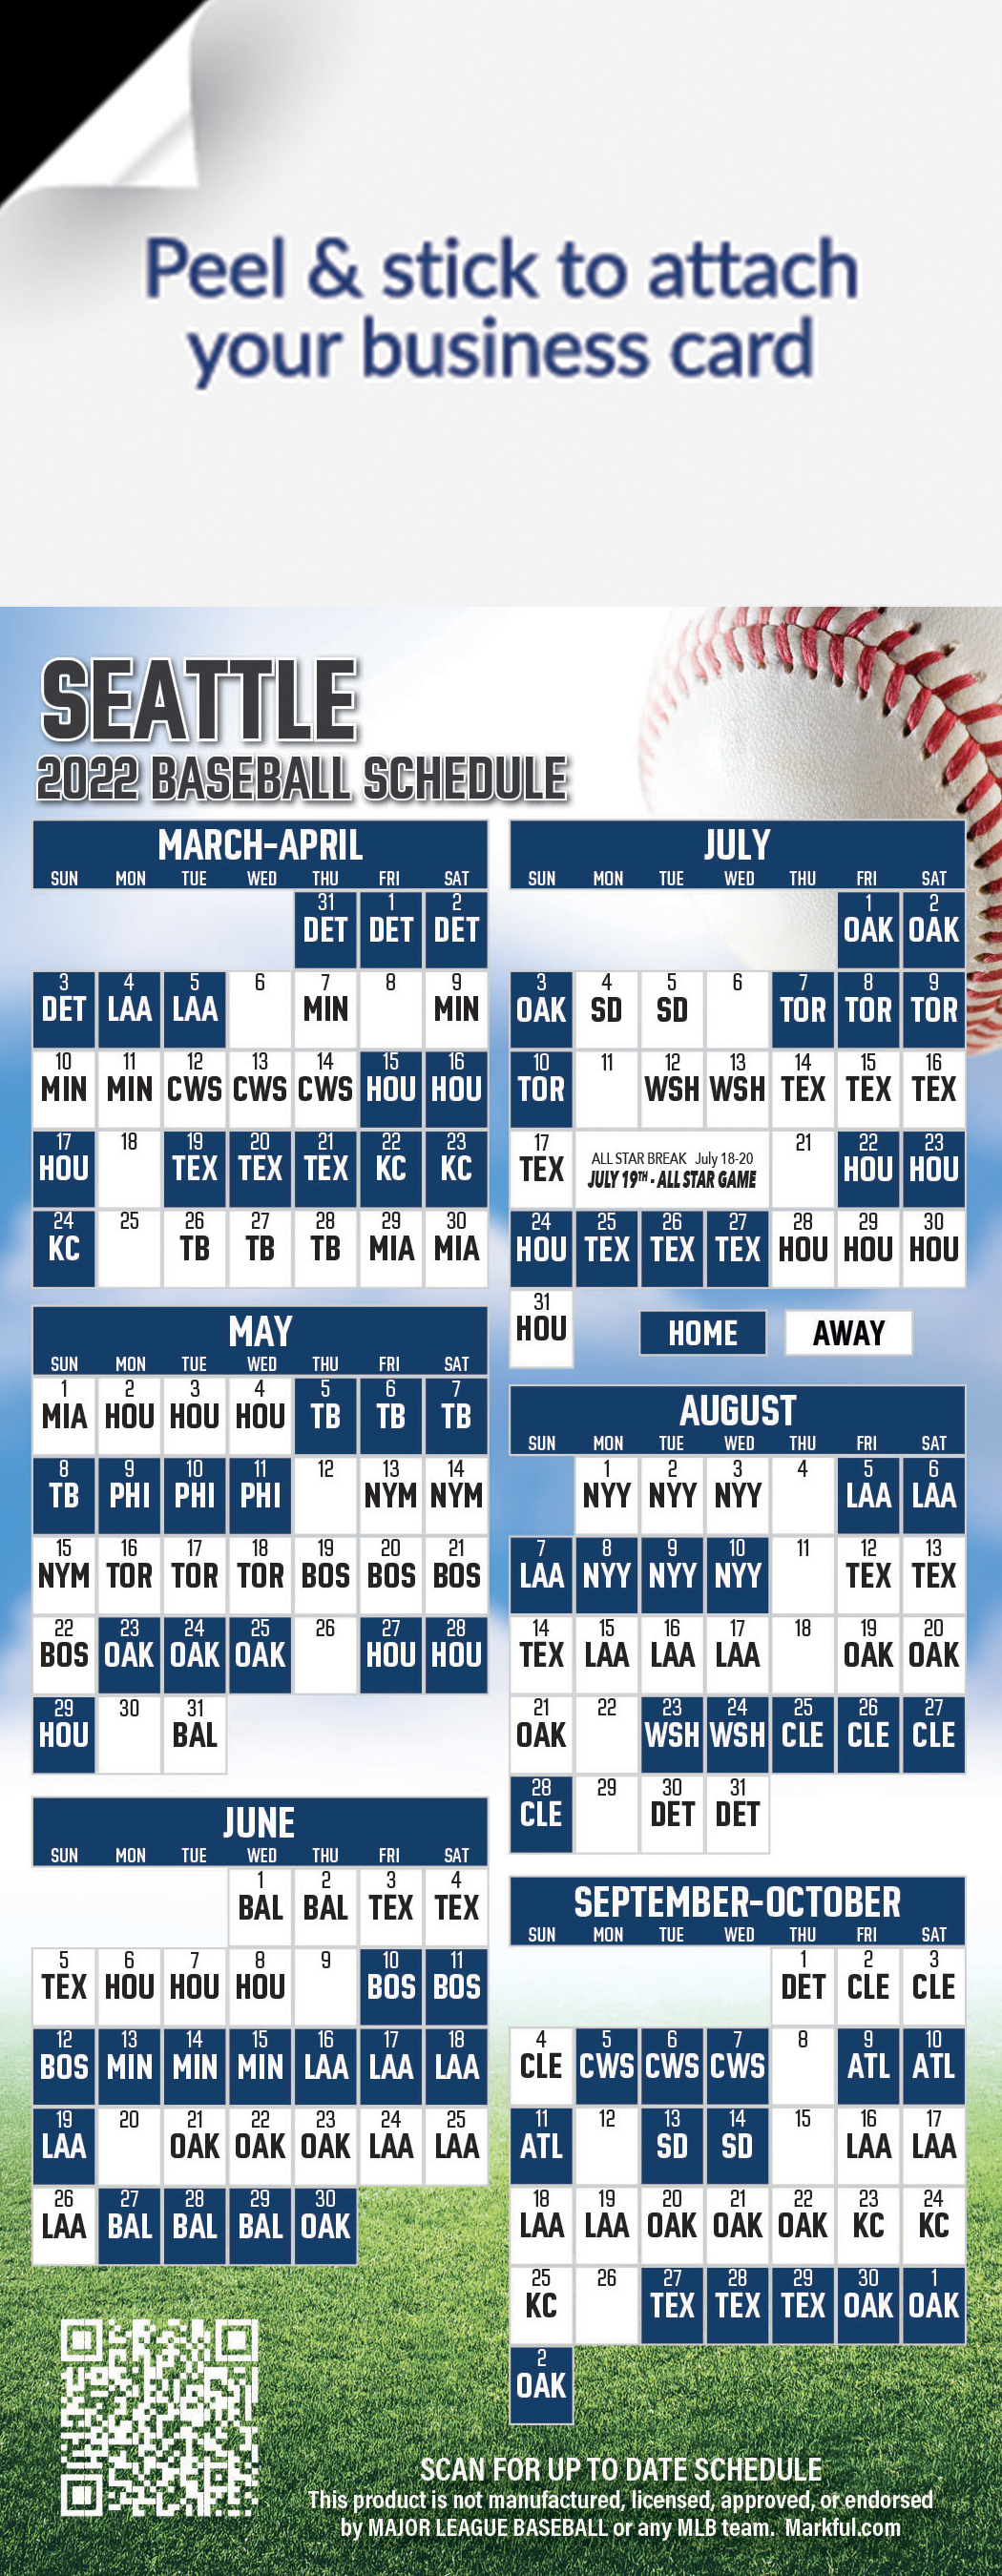 Mariners Schedule 2022 Pdf 2022 Seattle Mariners Schedule Magnets & Magnetic Schedules | Markful